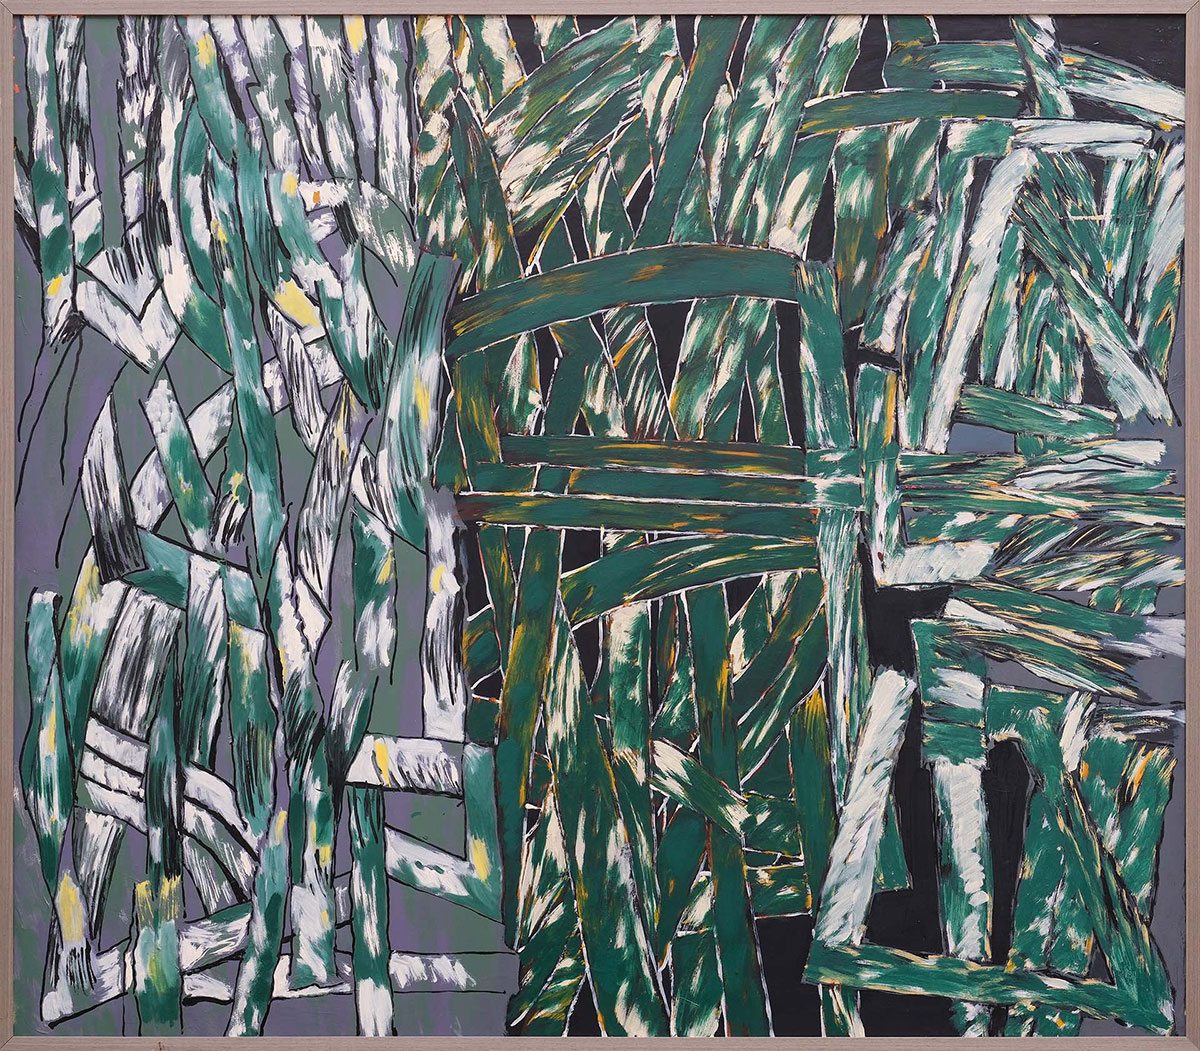 A painting depicts an abstract mass of tangled, leaflike green shapes against a black background.